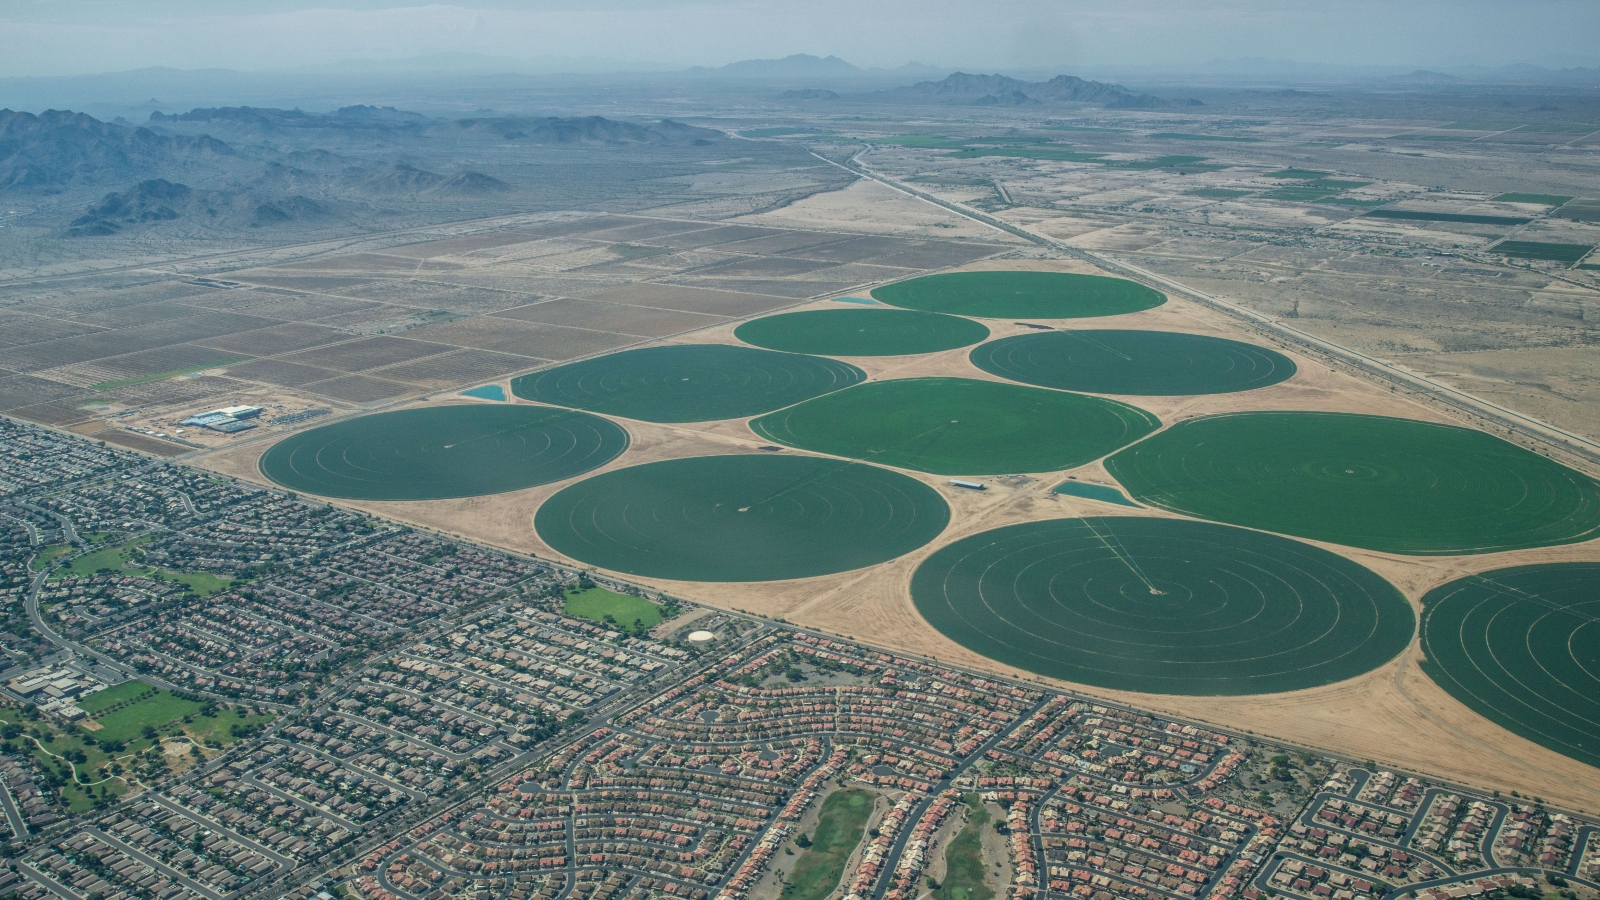 Golf resorts and urban housing developments in Arizona bordering farmlands on the Gila Indian Reservation.